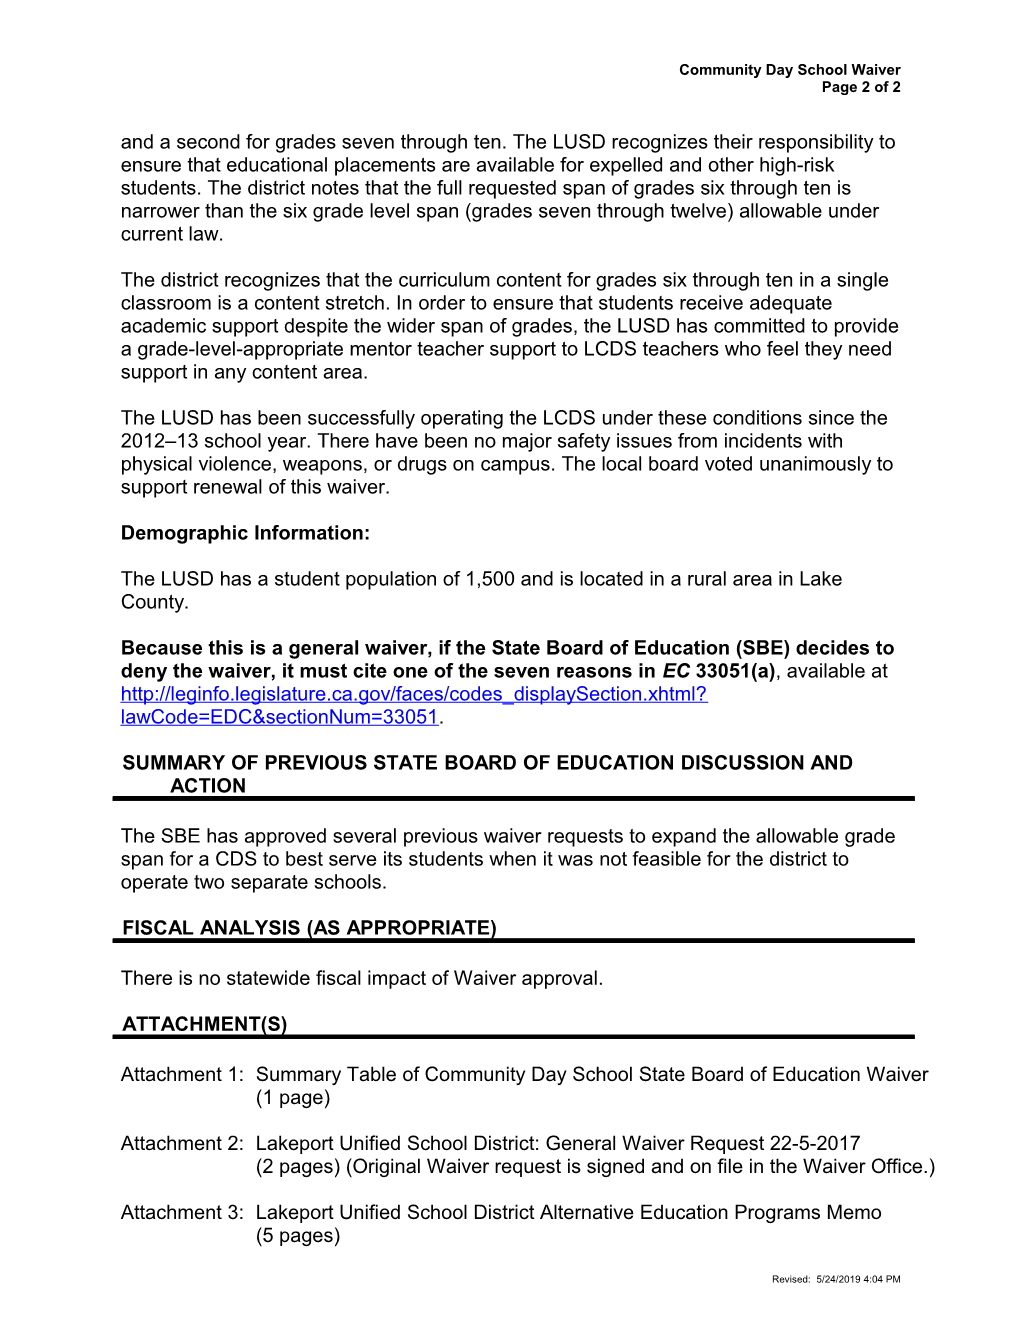 September 2017 Waiver Item W-04 - Meeting Agendas (CA State Board of Education)